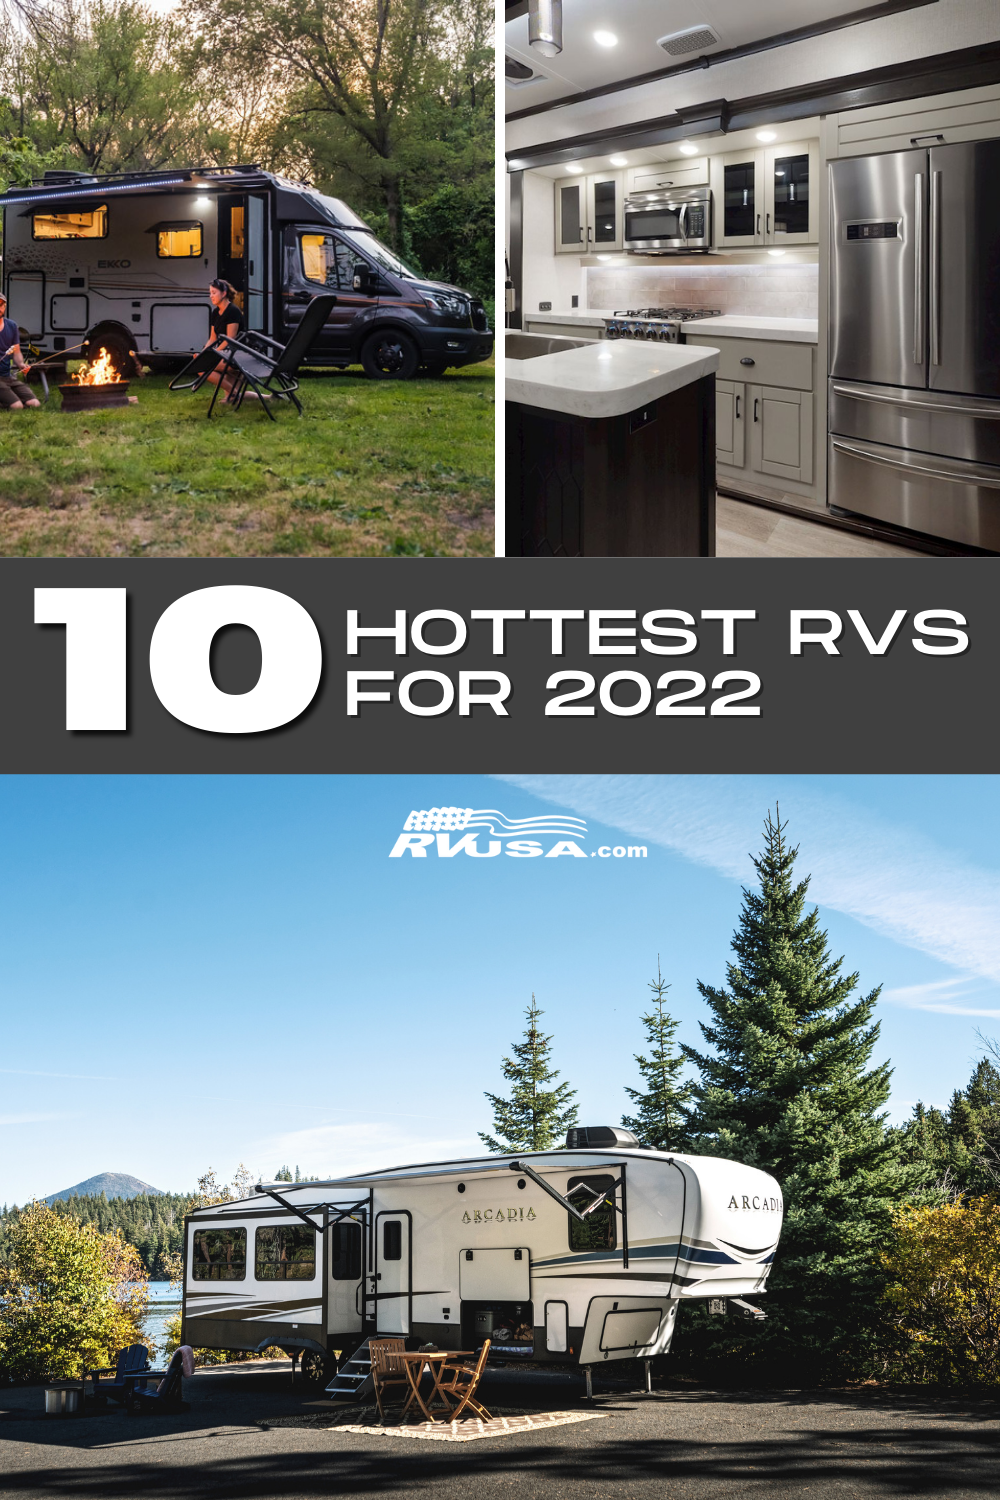 The Winnebago EKKO, CrossRoads Redwood and Keystone Arcadia all make our list of the hottest RVs for 2022